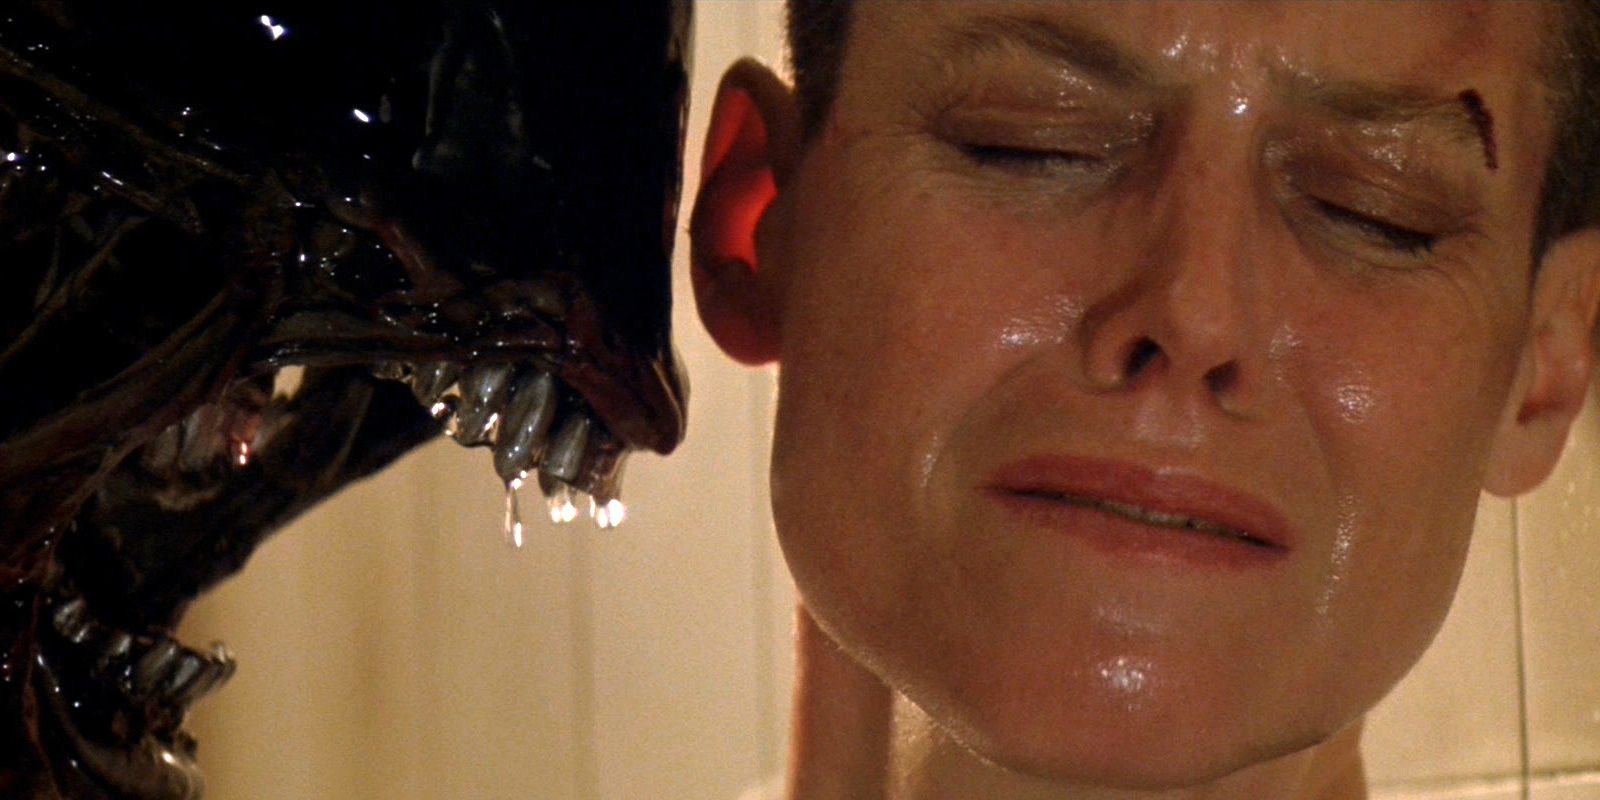 Ripley is confronted by a xenomorph in Alien 3